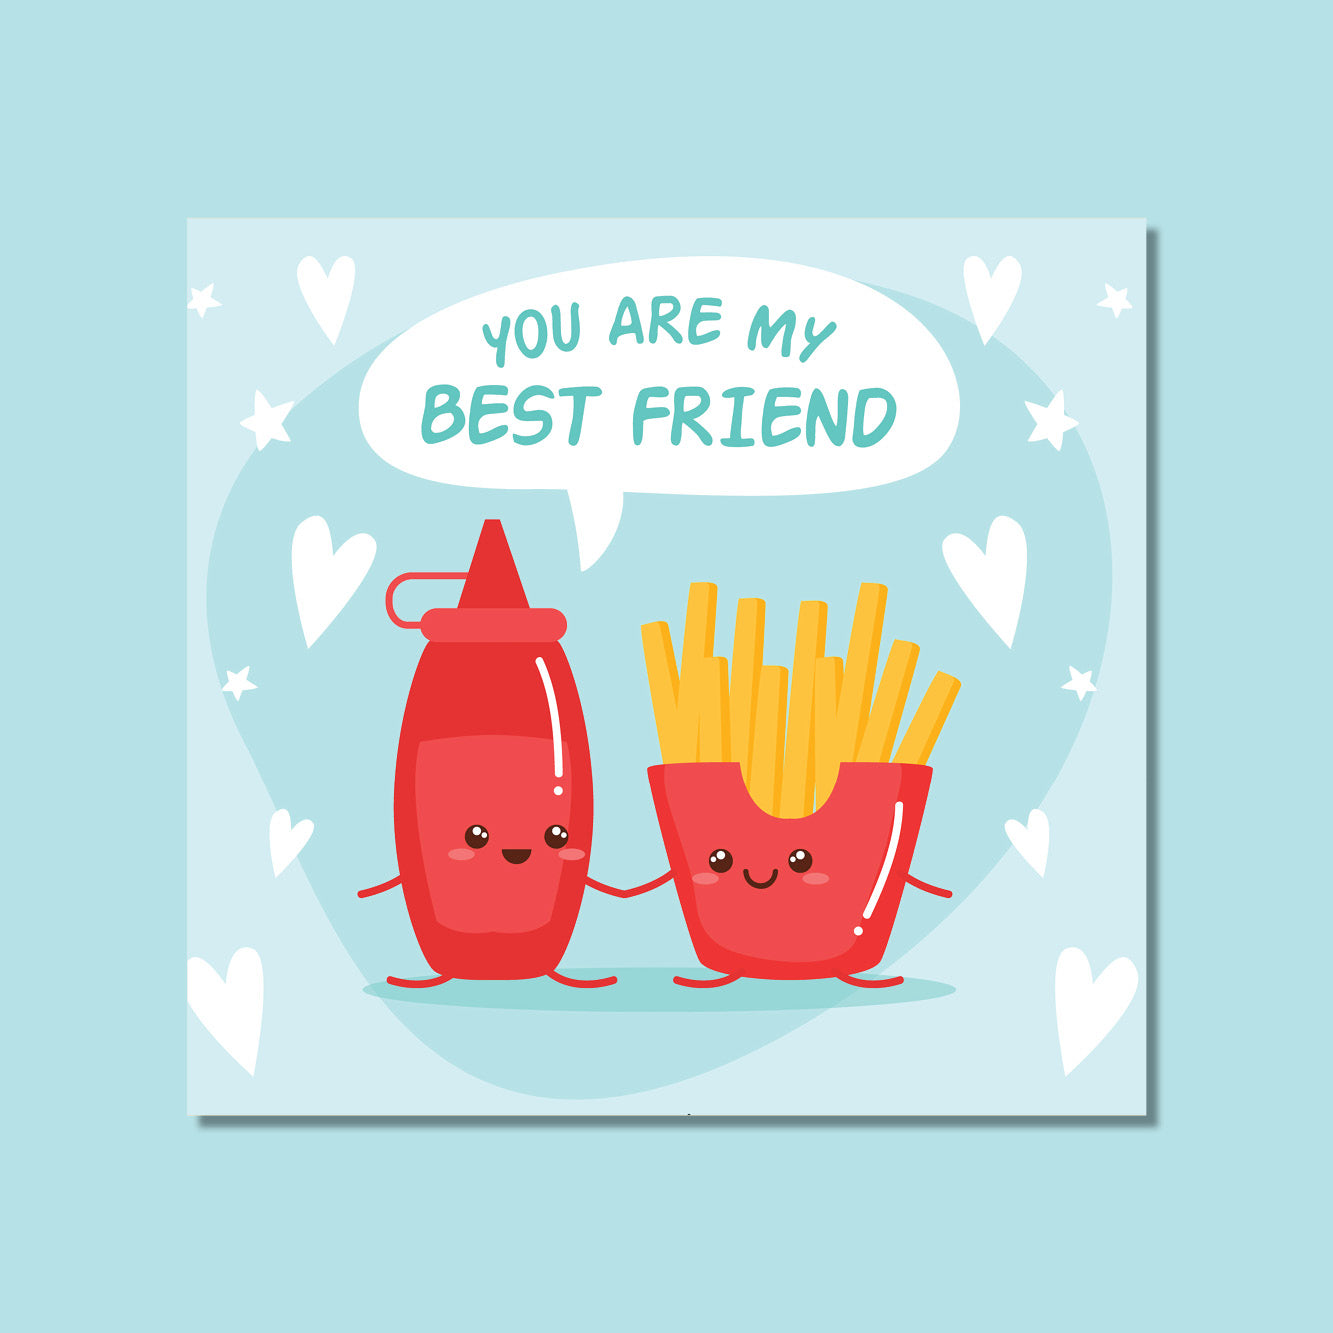 Friendship - Cute Fries and Ketchup